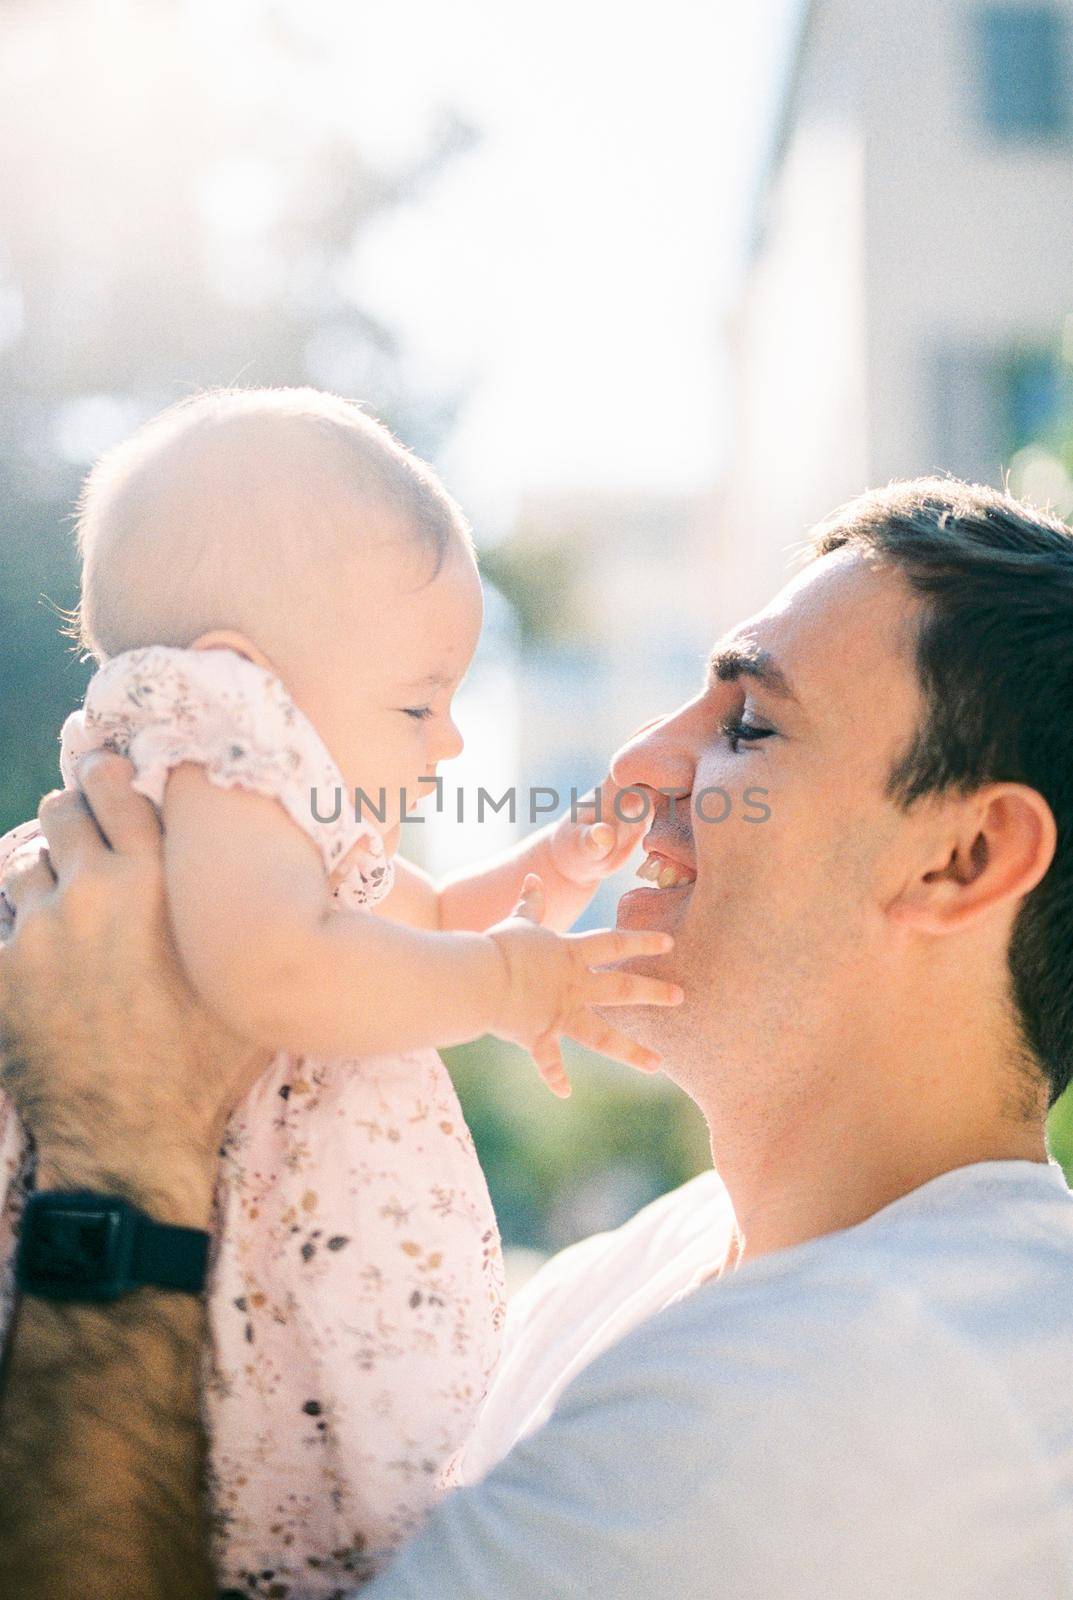 Little baby touches her dad face with her hands. Side view. High quality photo